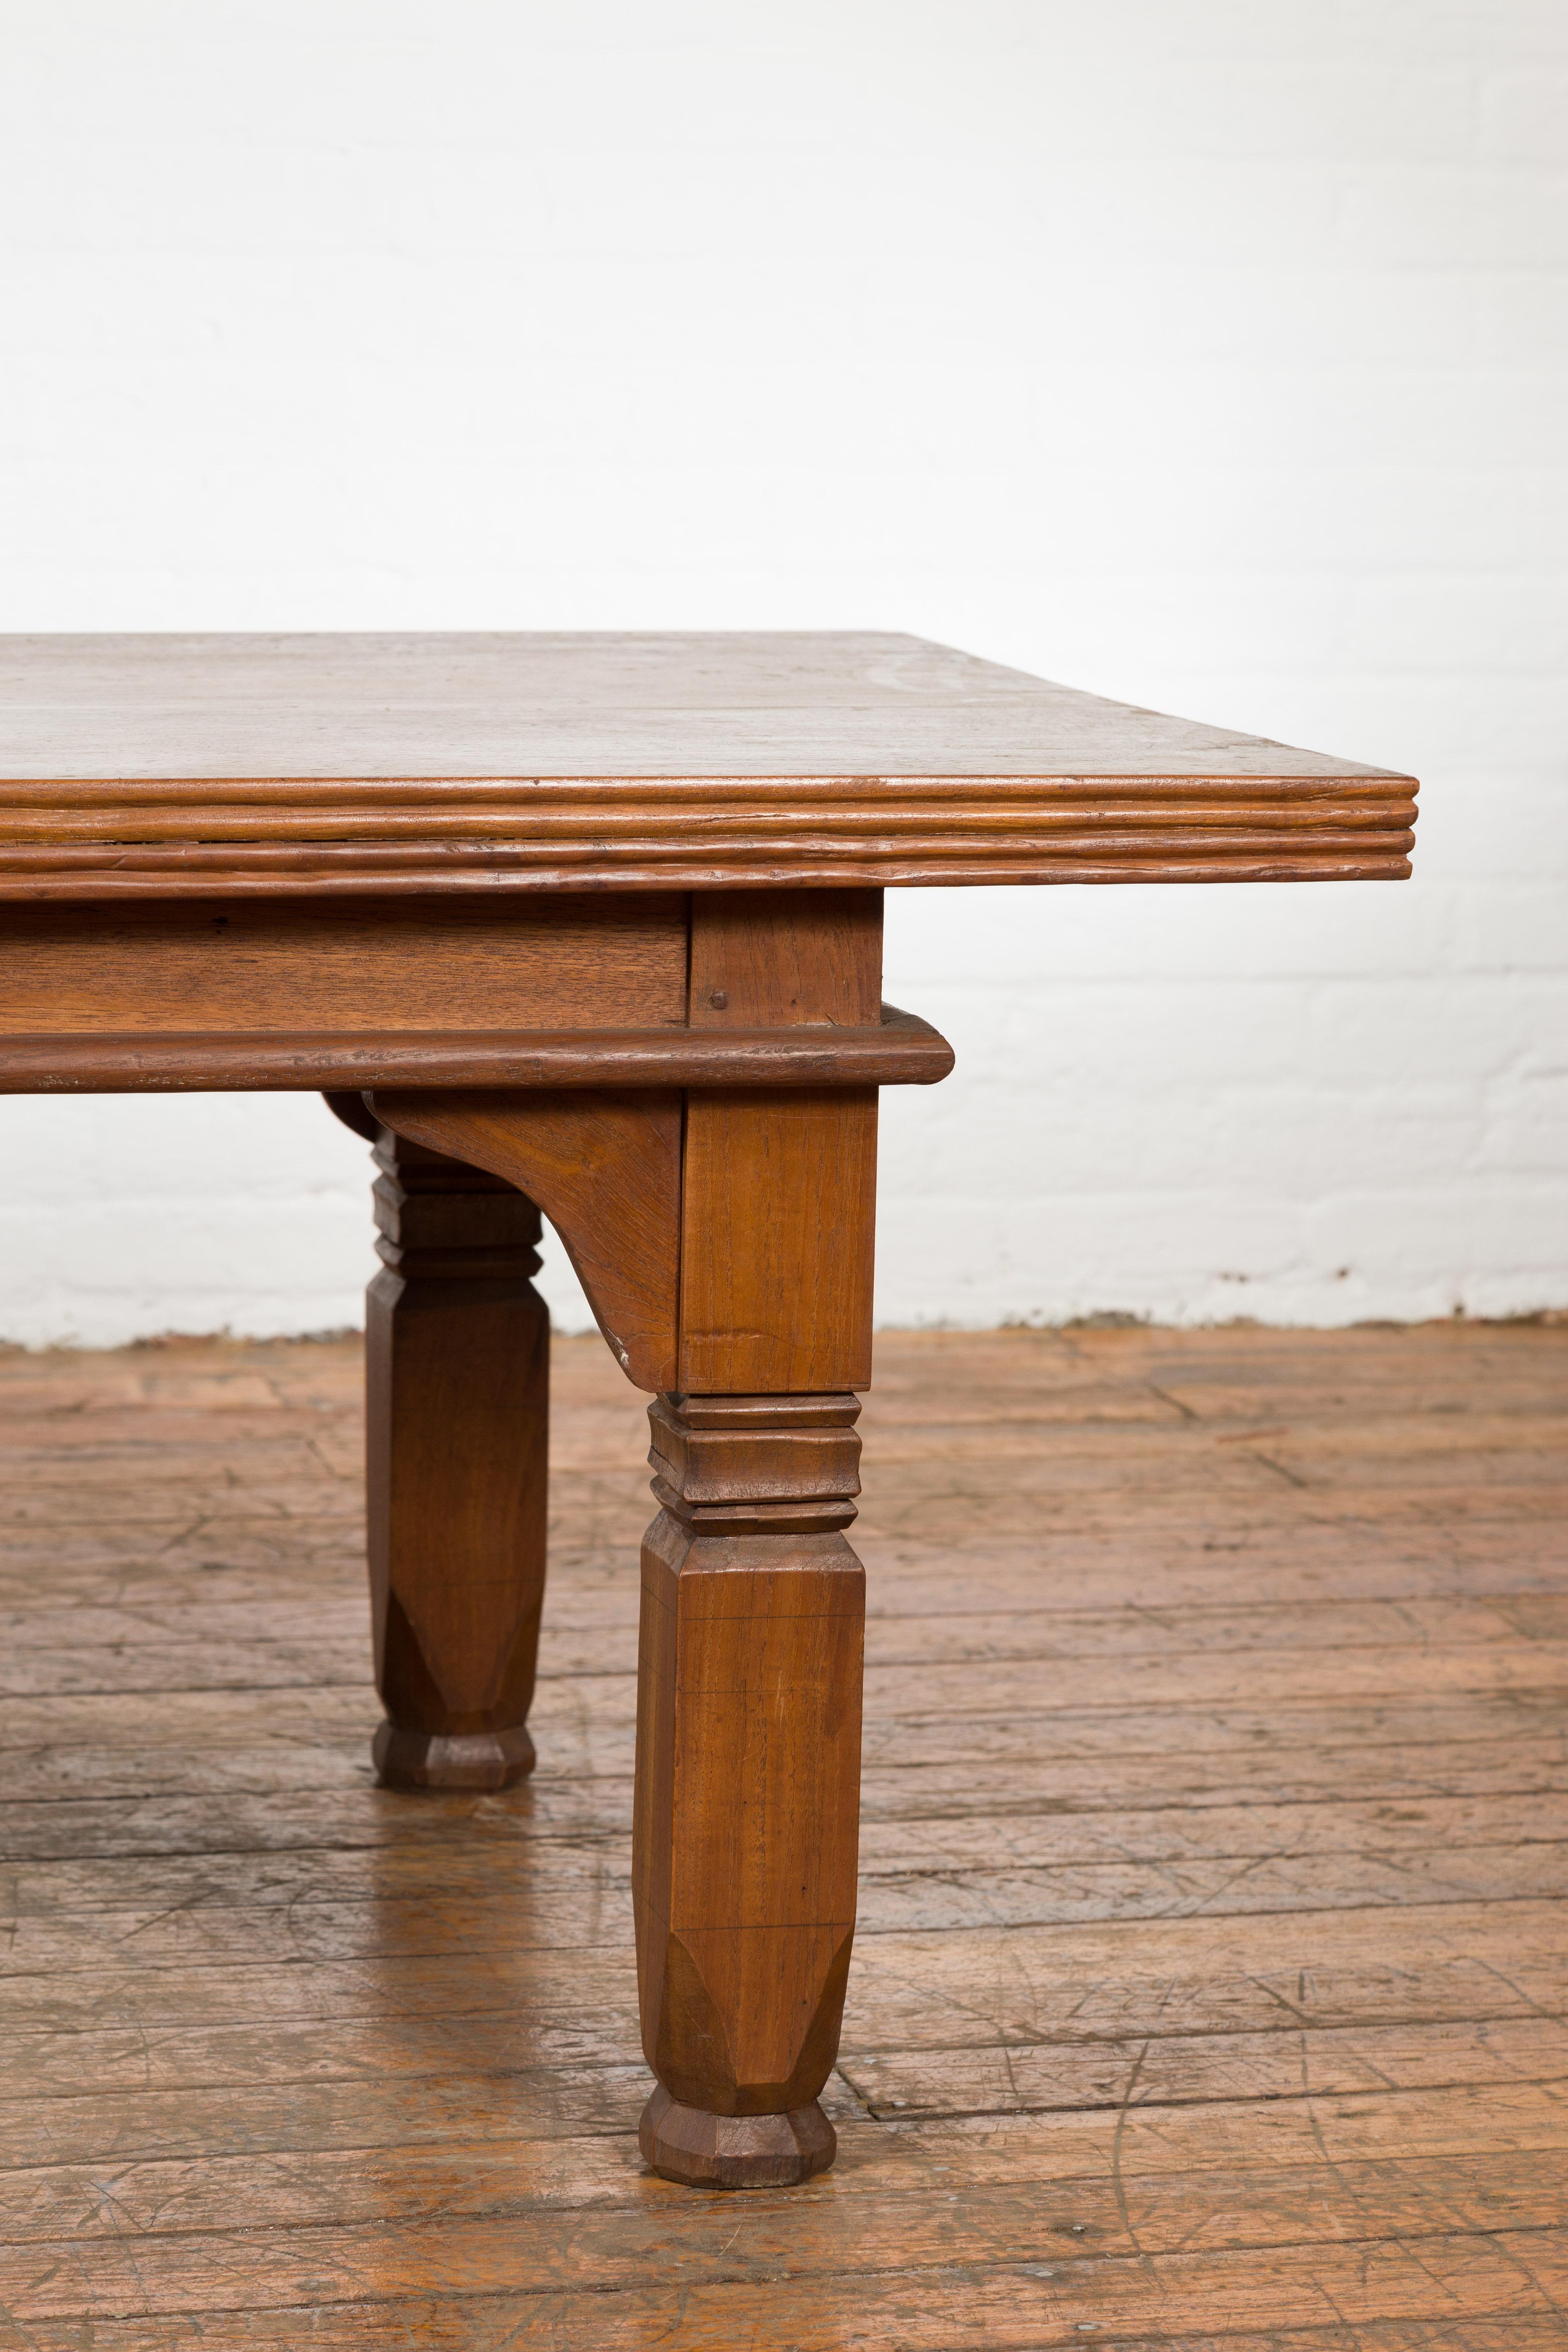 Oversized 19th Century Indonesian Coffee Table with Reeded Edge and Carved Legs In Good Condition For Sale In Yonkers, NY